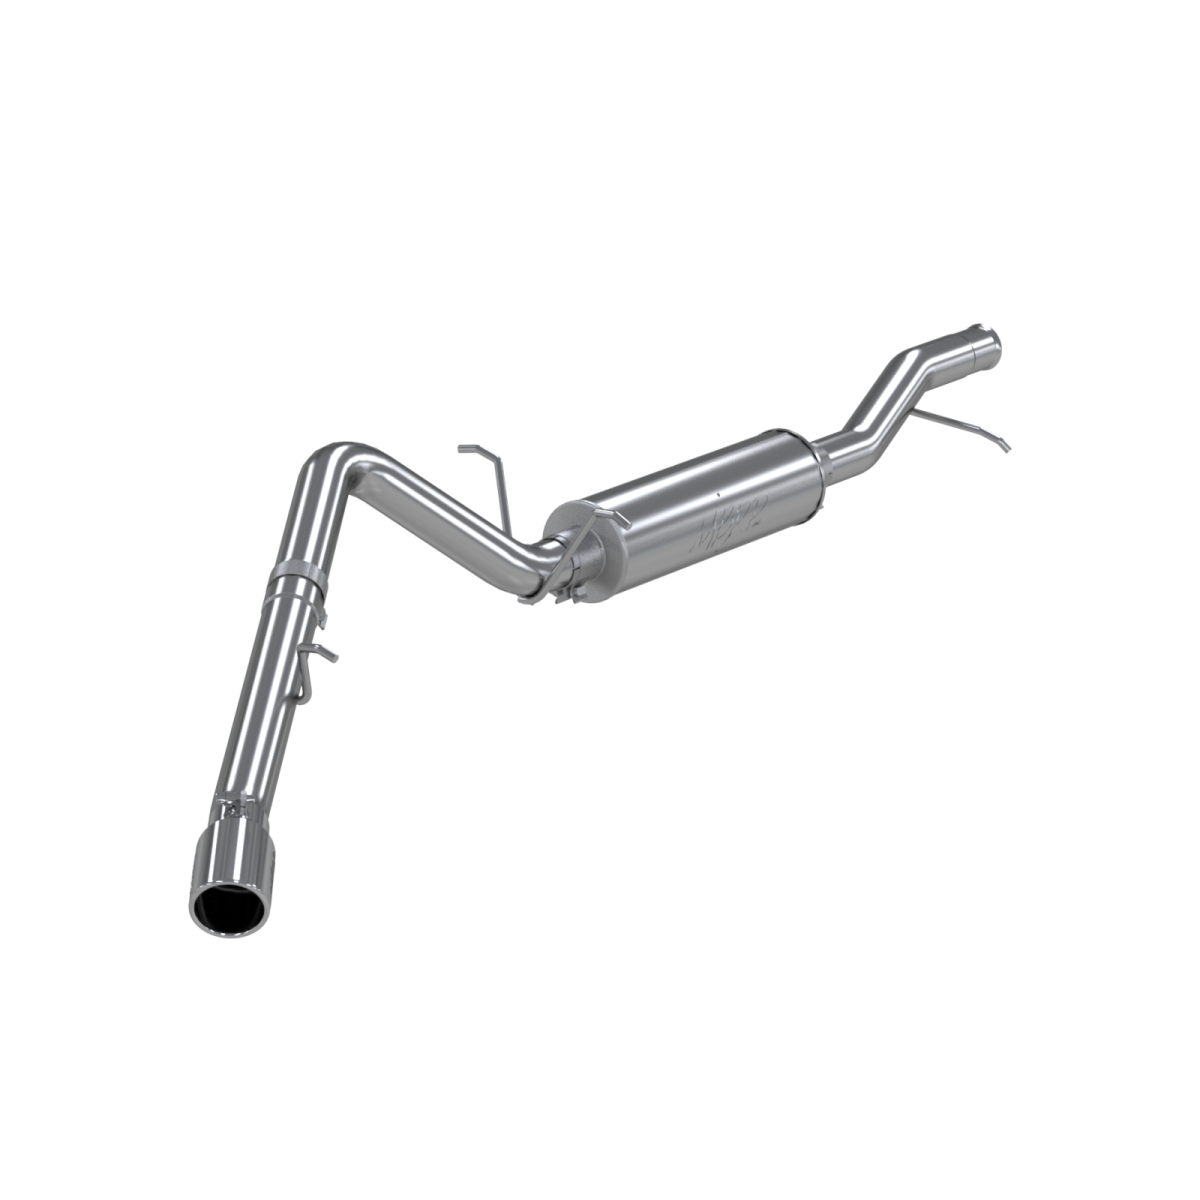 MBRP - MBRP Cat Back Exhaust System Single Side T409 Stainless Steel For 09-14 Chevrolet/GMC Yukon/Chevy Tahoe 5.3L S5062409